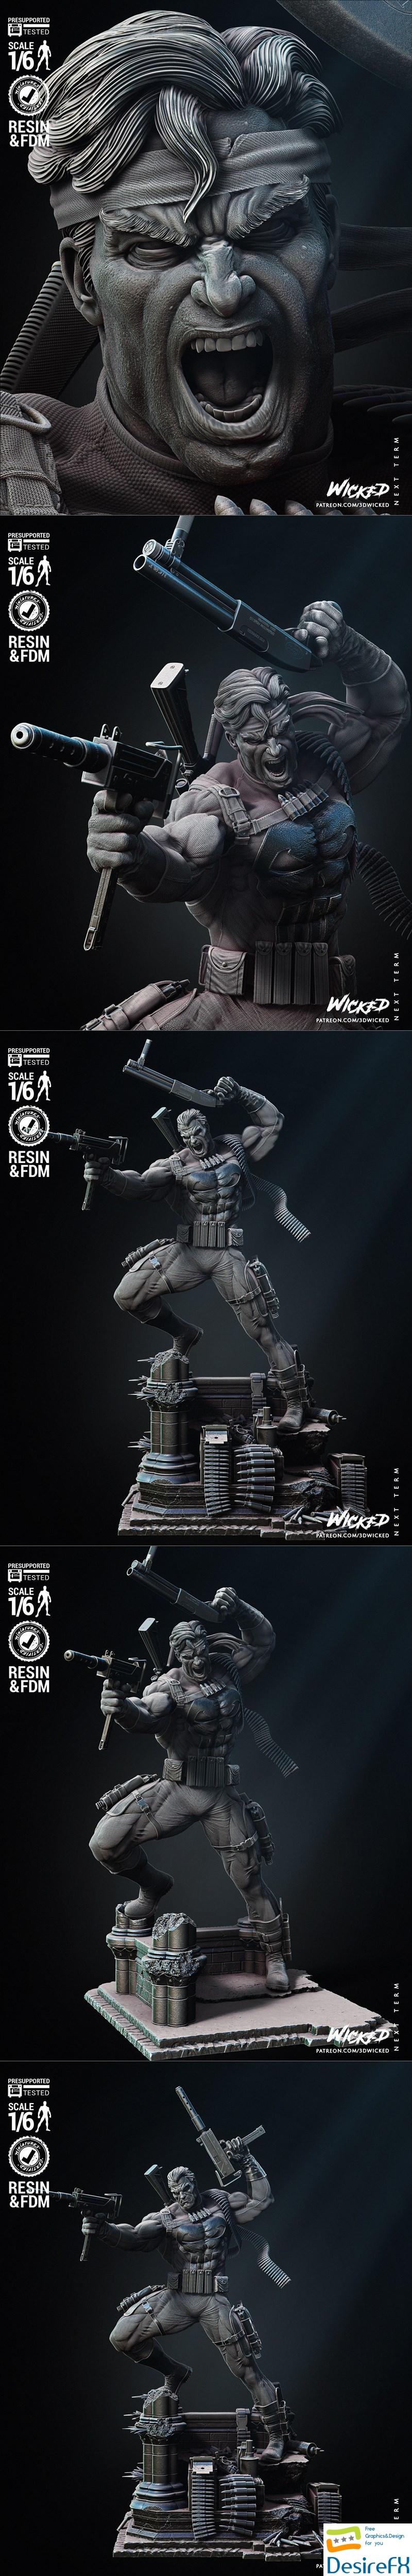 Wicked - The Punisher Sculpture 3D Print